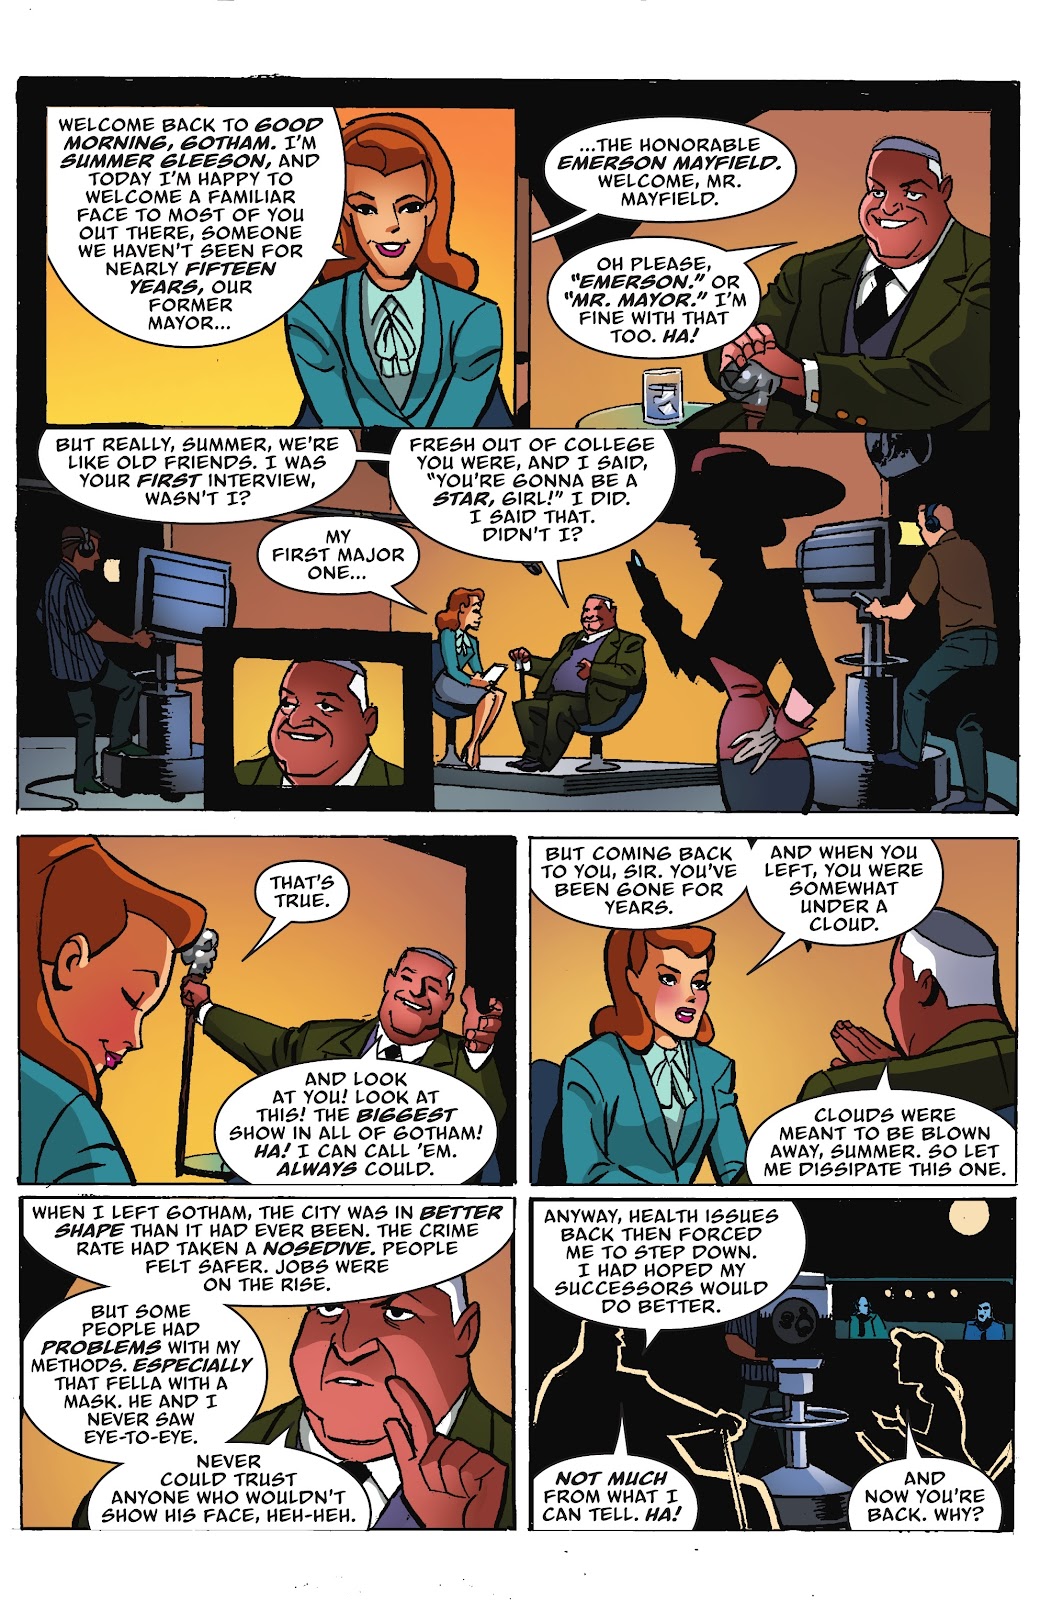 Batman: The Adventures Continue: Season Two issue 5 - Page 4